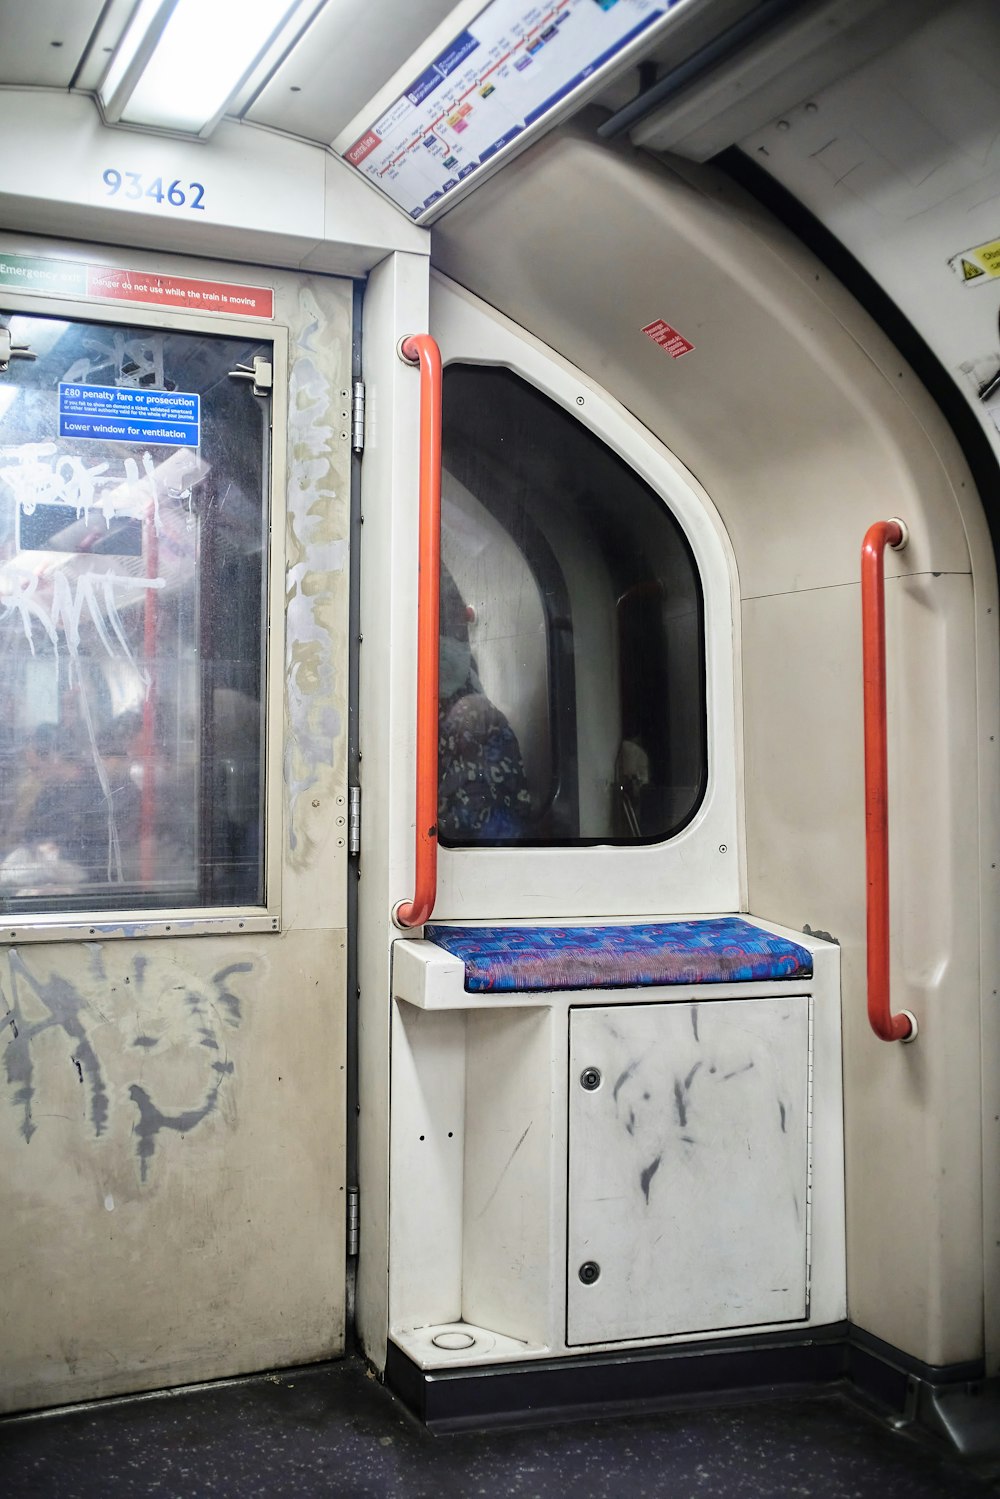 the inside of a subway car with graffiti on the walls